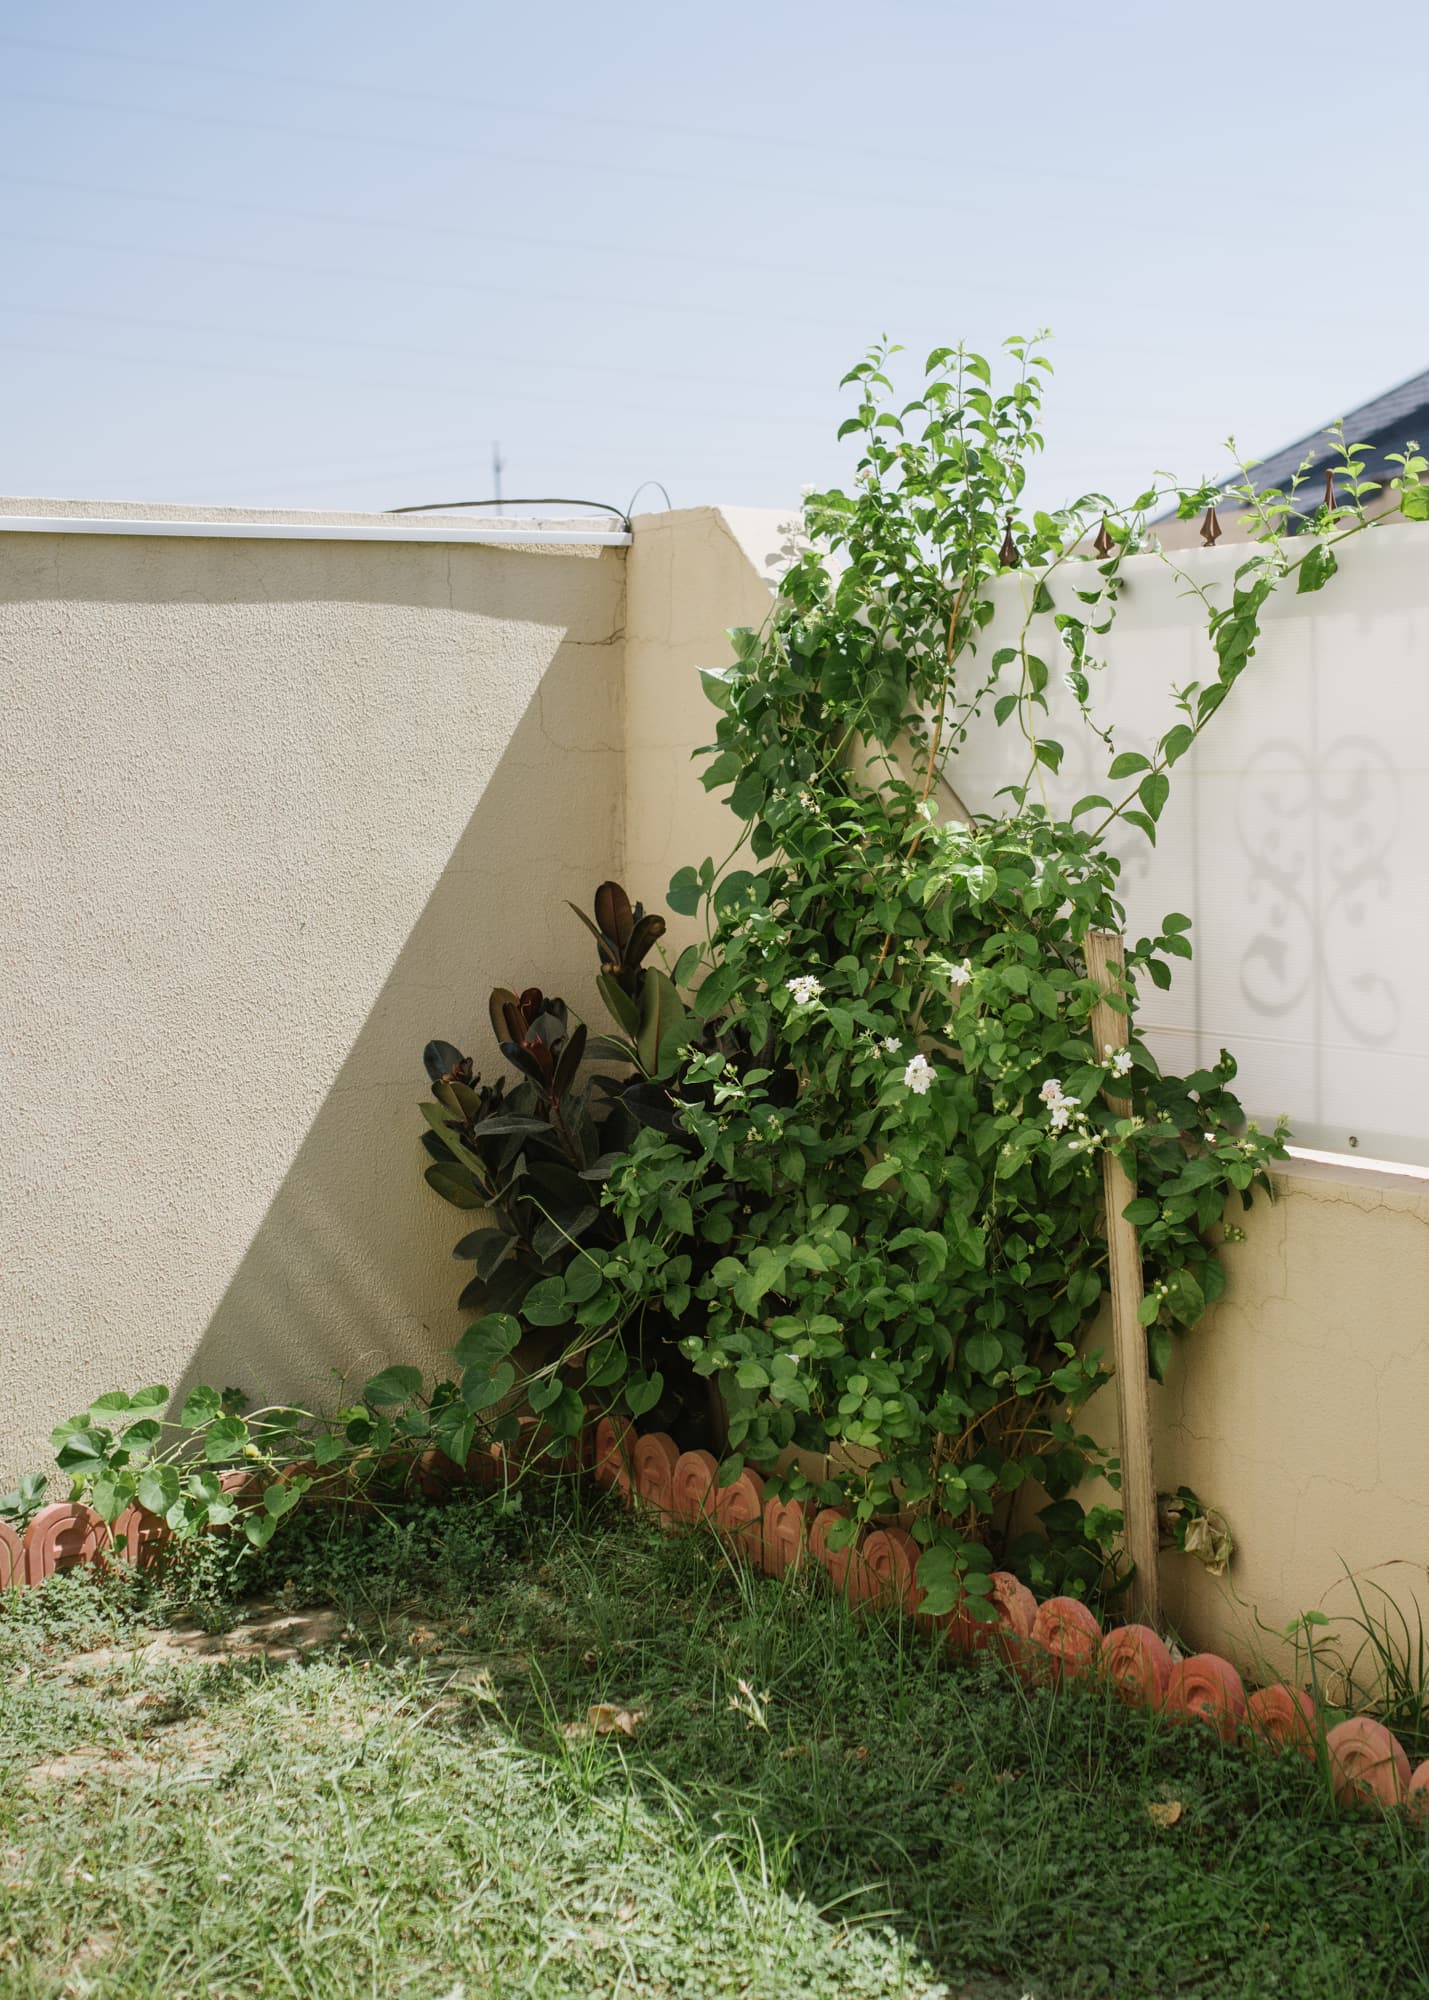 Jasemine flourishes in the frontyard of Abdullah Kurdi's house in Erbil, Iraq, on Sept 2nd, 2019. Tima Kurdi planted it there, it's her favourite plant.